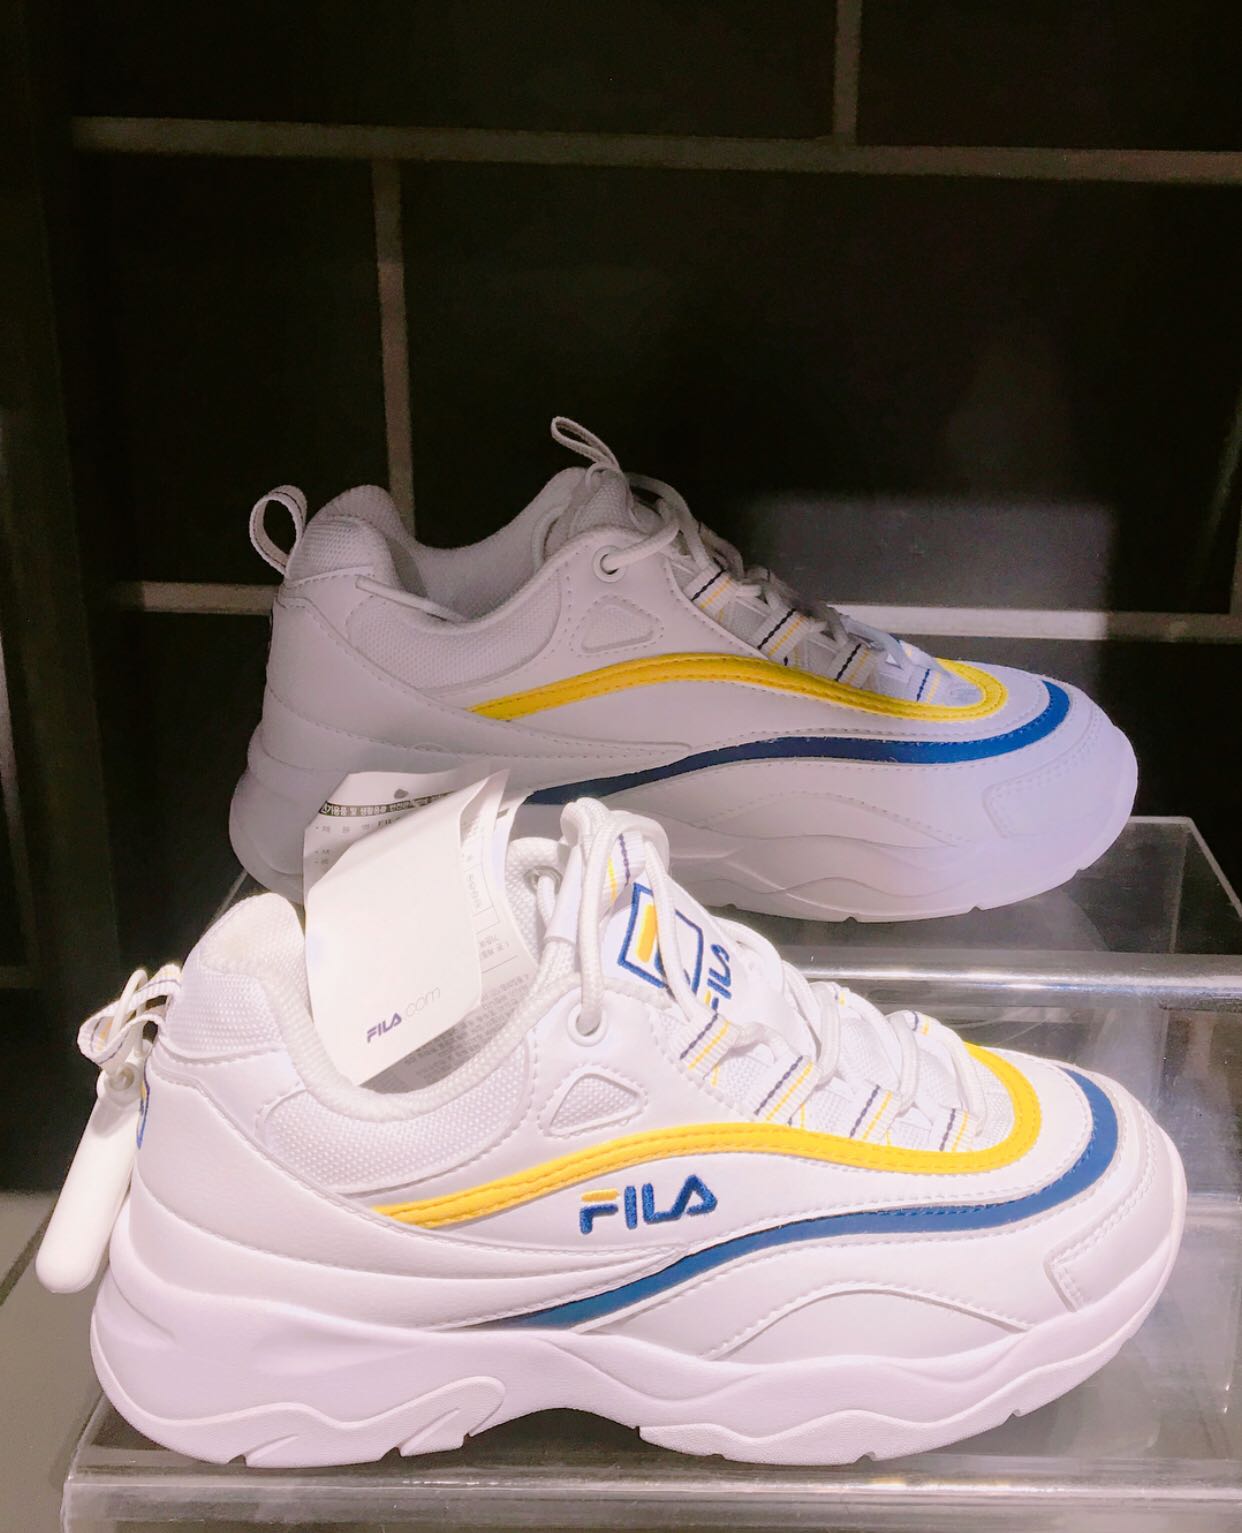 fila limited edition sneakers 